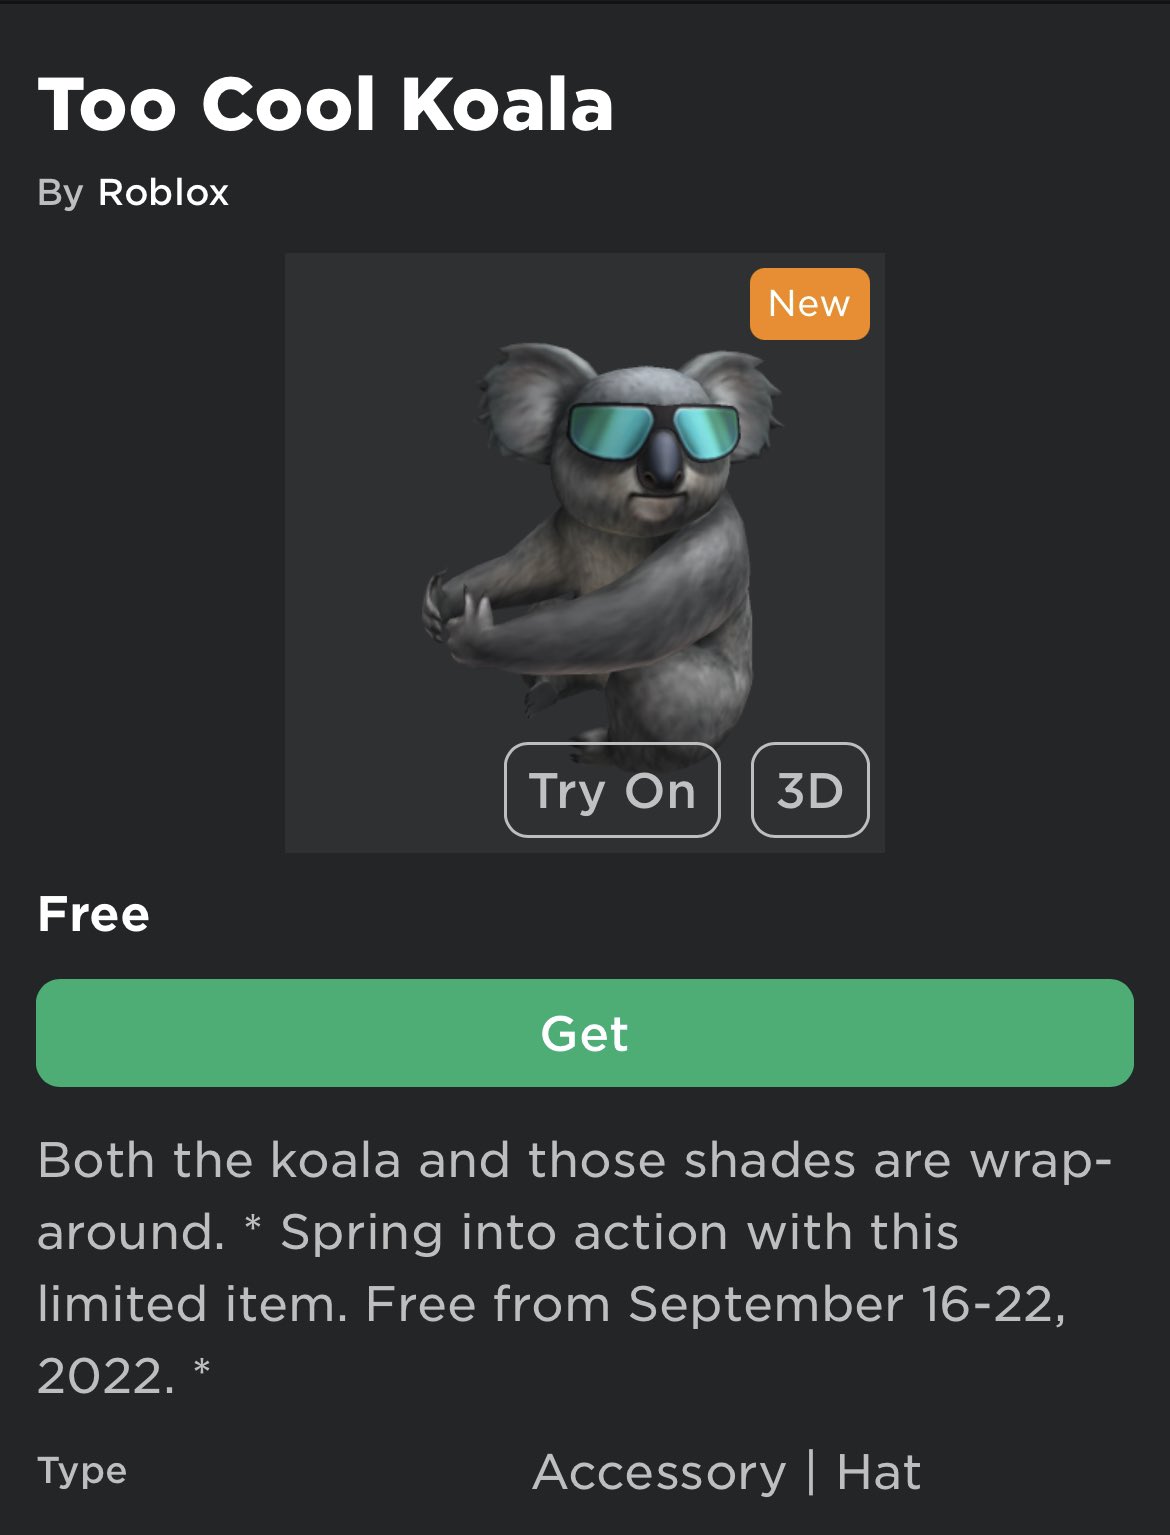 Free Roblox Items That Should Go Limited! 